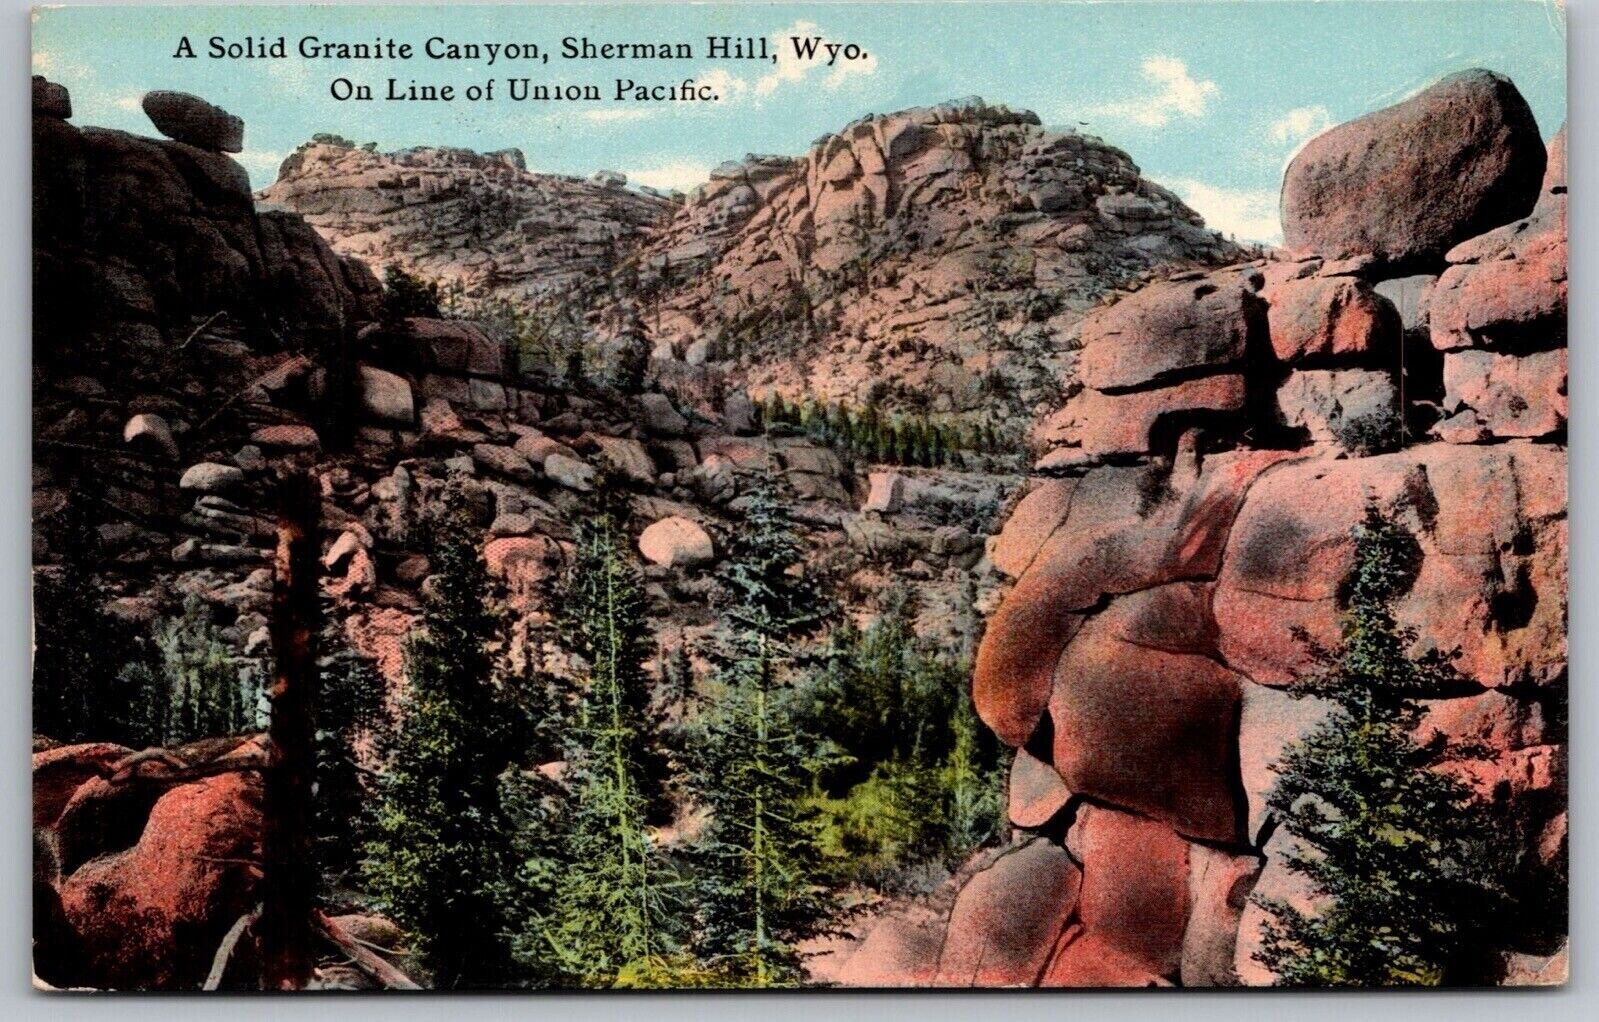 Solid Granite Canyon Cherman Hill Wyoming Union Pacific Line Mountain Postcard